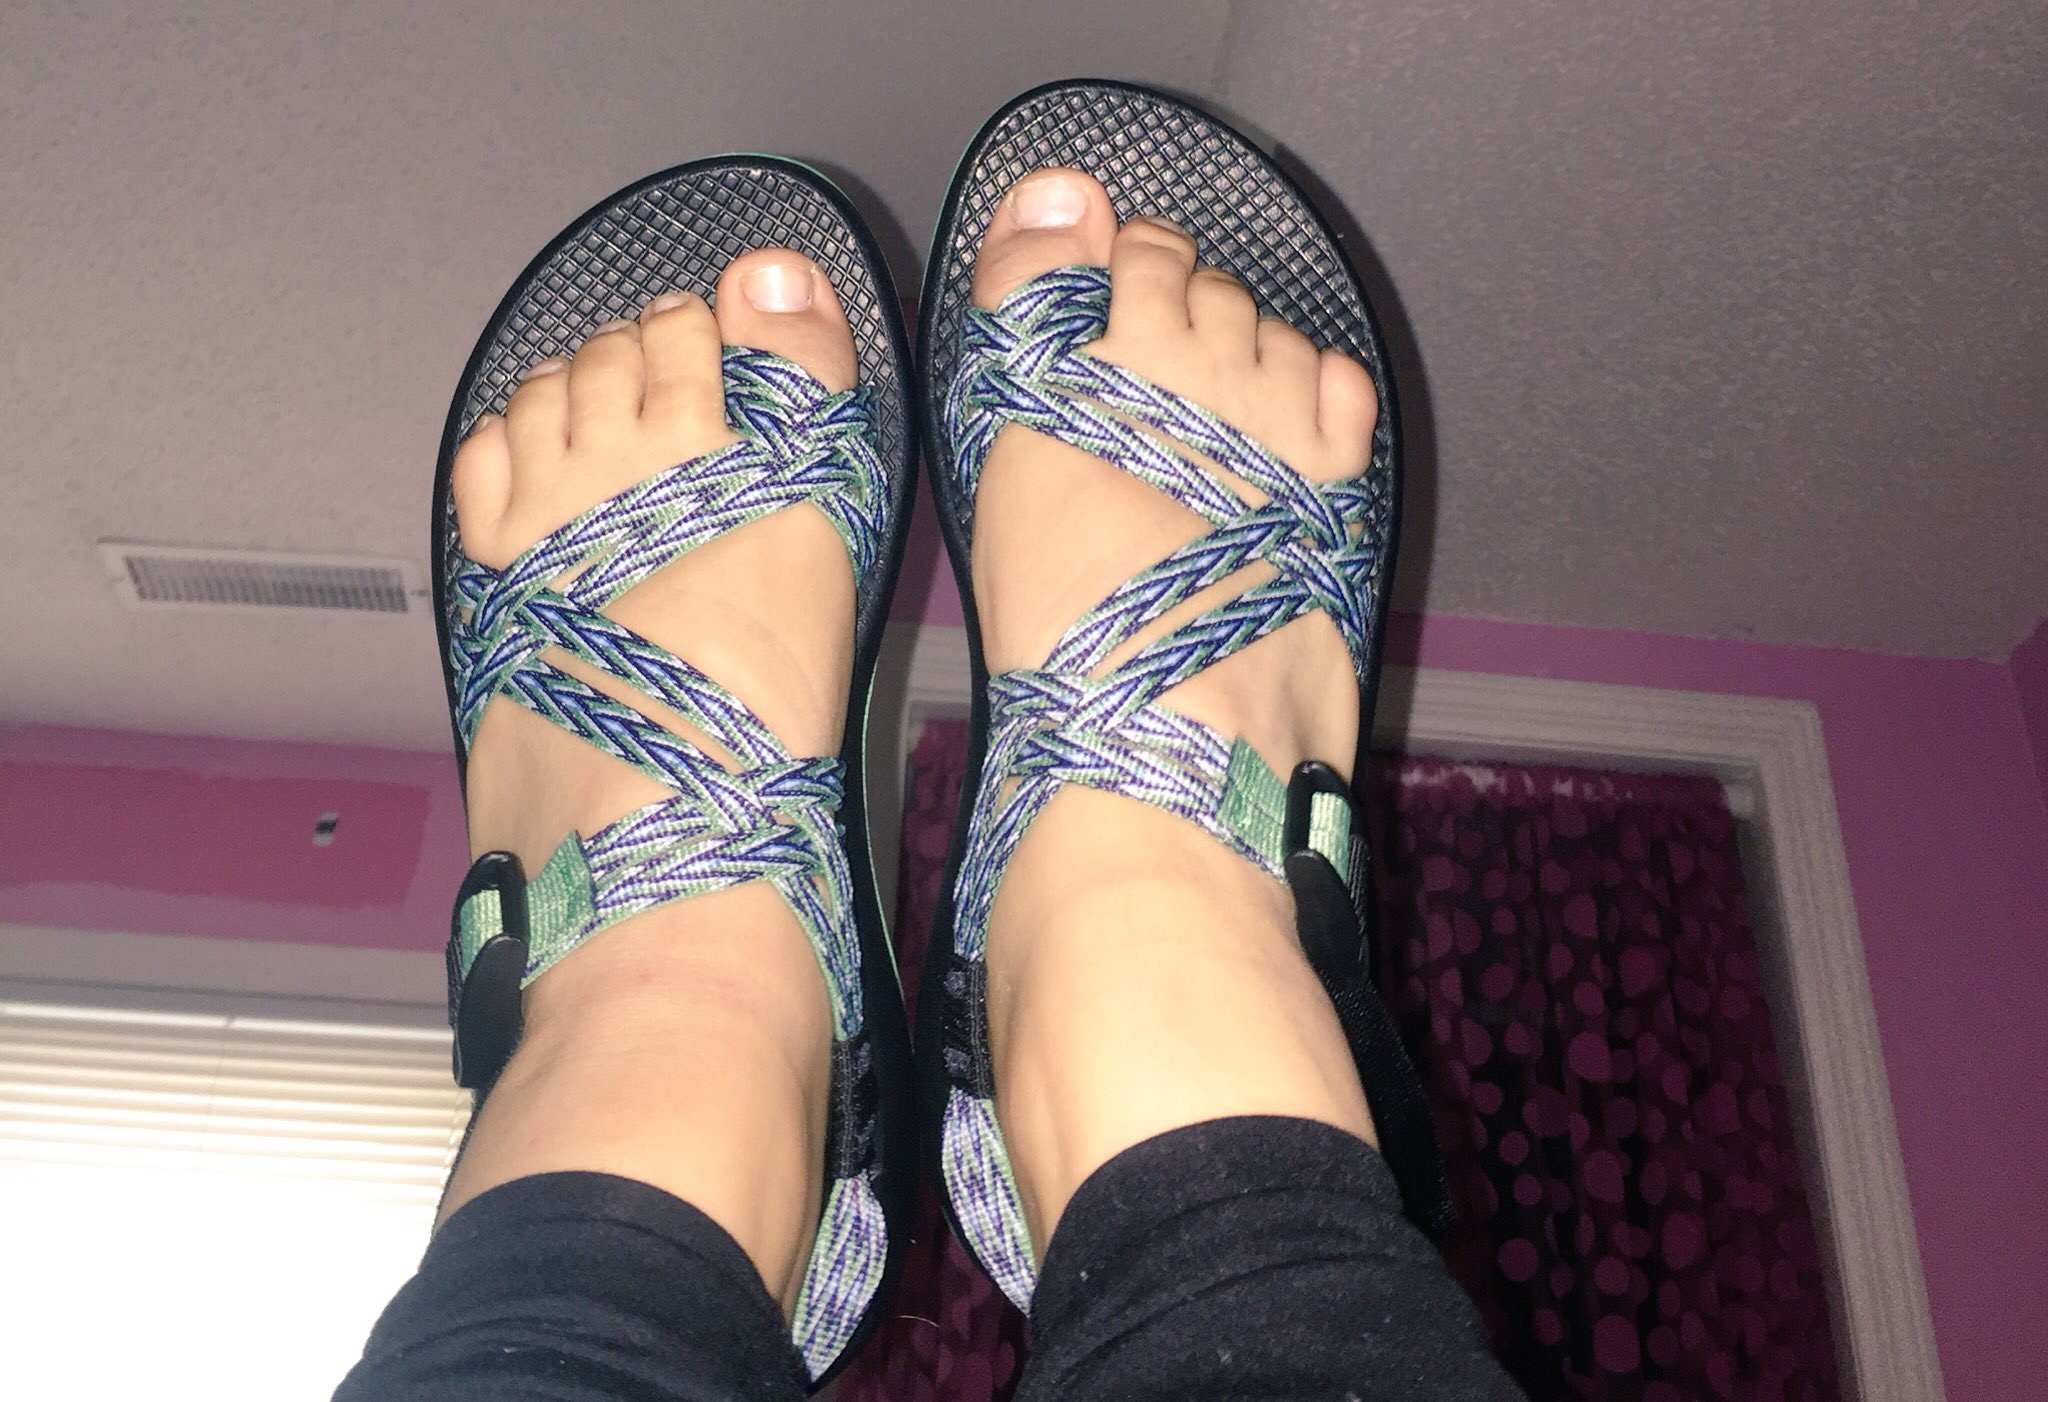 chacos on people's feet